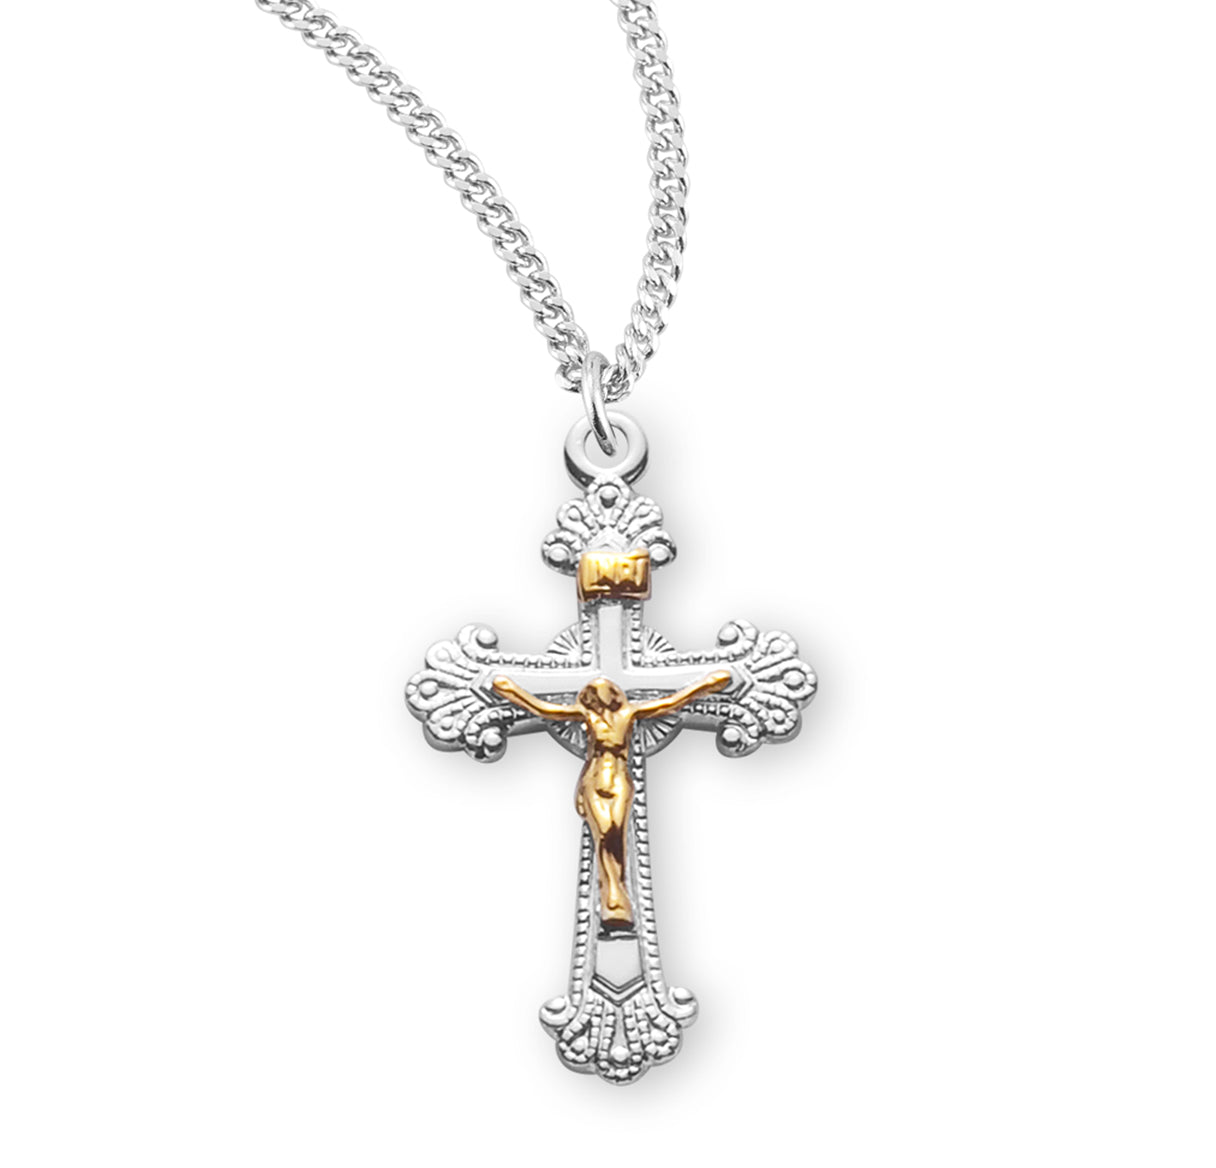 Two Toned Fancy Engraved Sterling Silver Crucifix